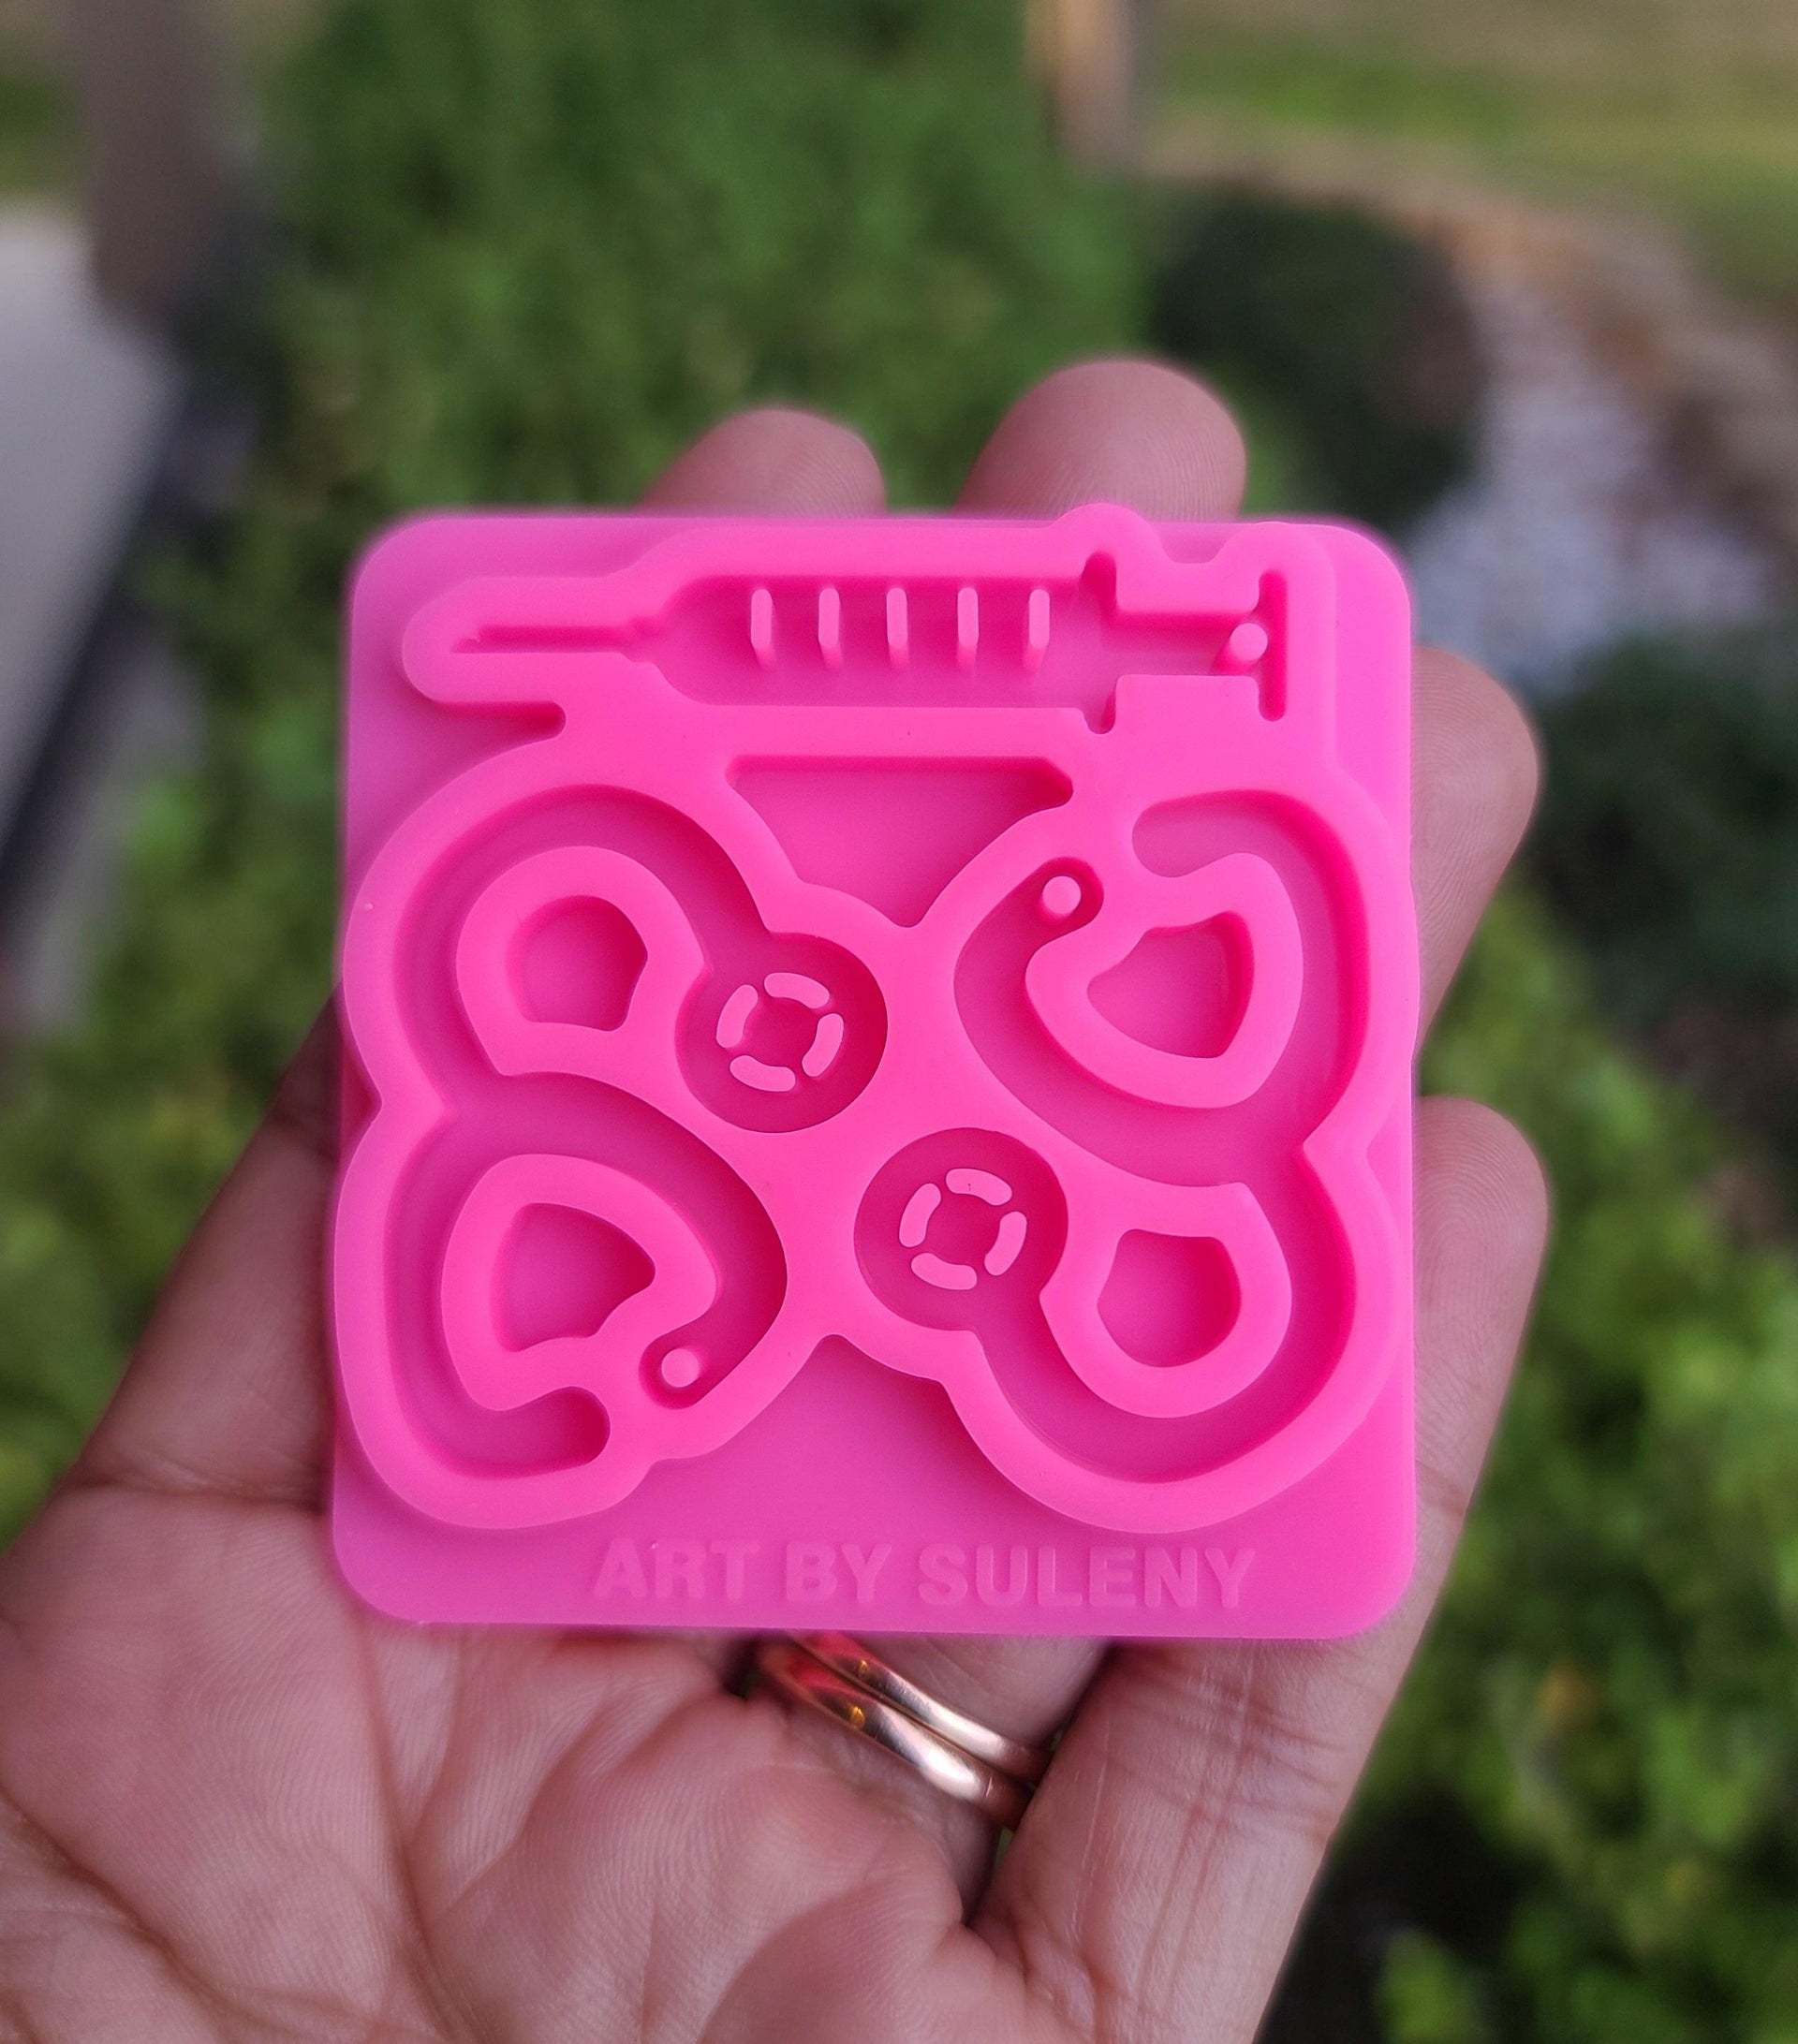 Stethoscope Silicone Mold - Syringe Resin Mold for Earrings - Silicone Mold for Epoxy Resin - Jewelry making mold - Mold for Keychain - Resin Mold - Art By Suleny Craft Store LLC